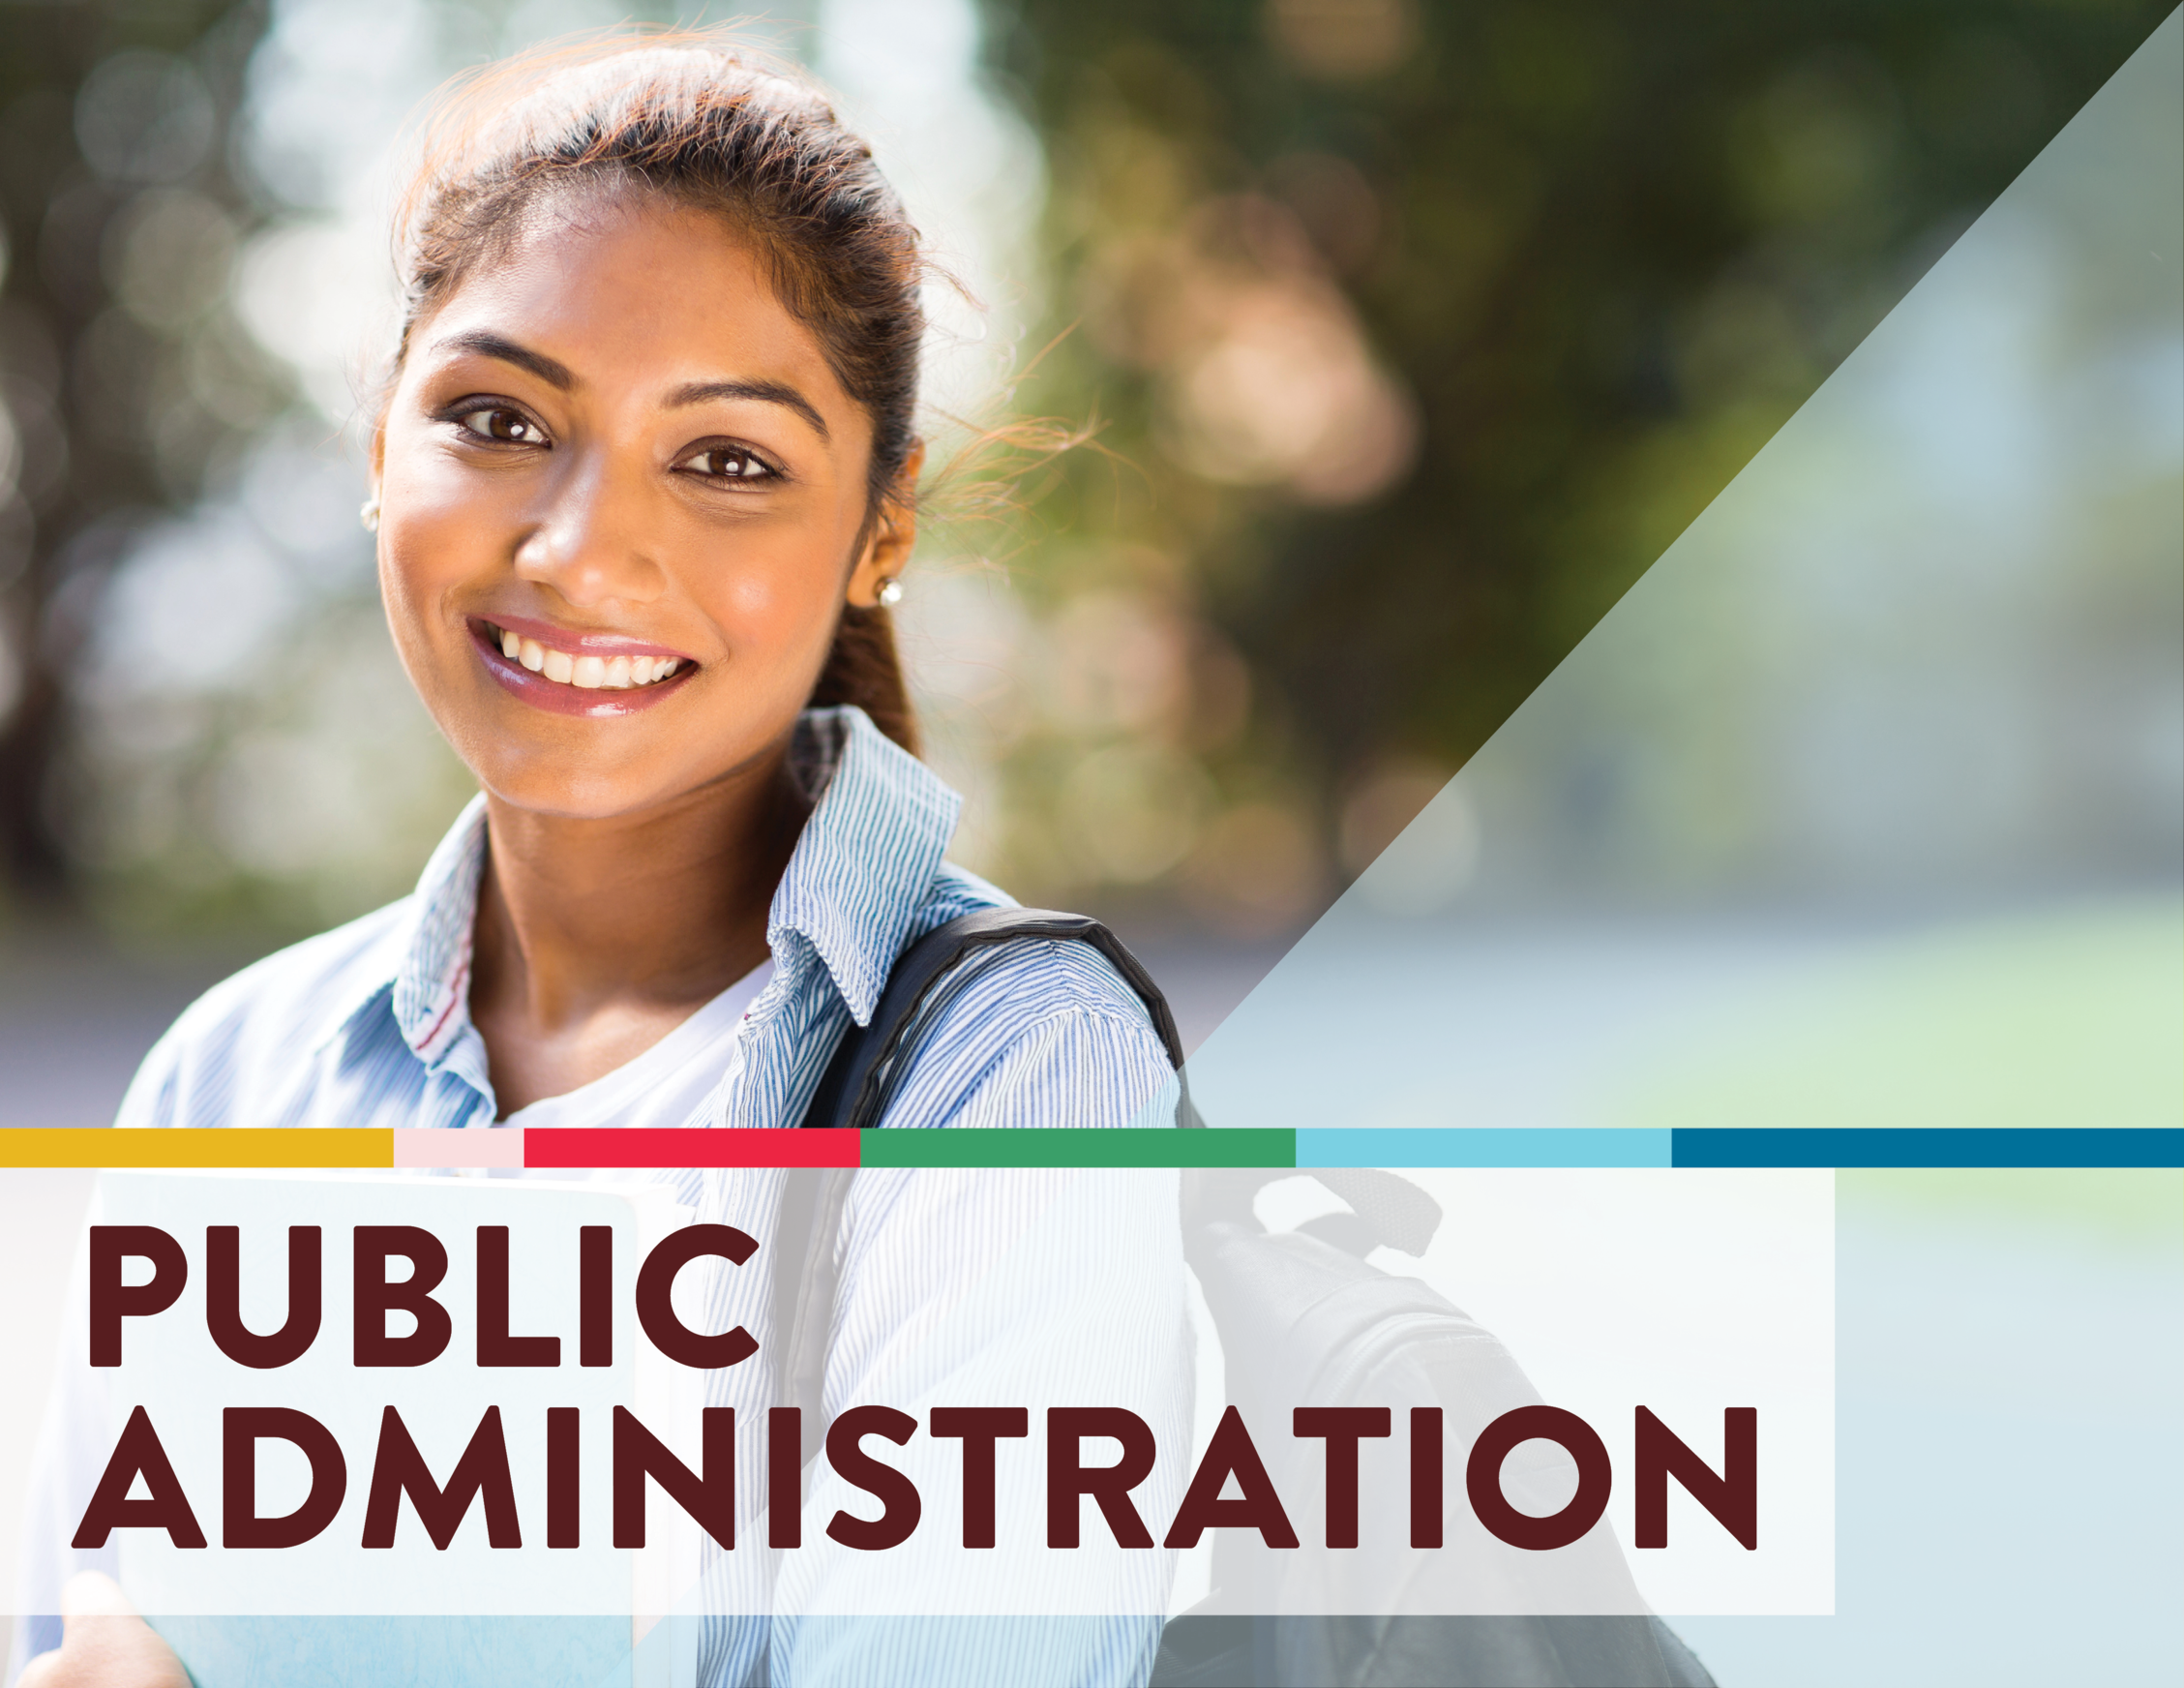 Please click the link to learn more about Public Administration.